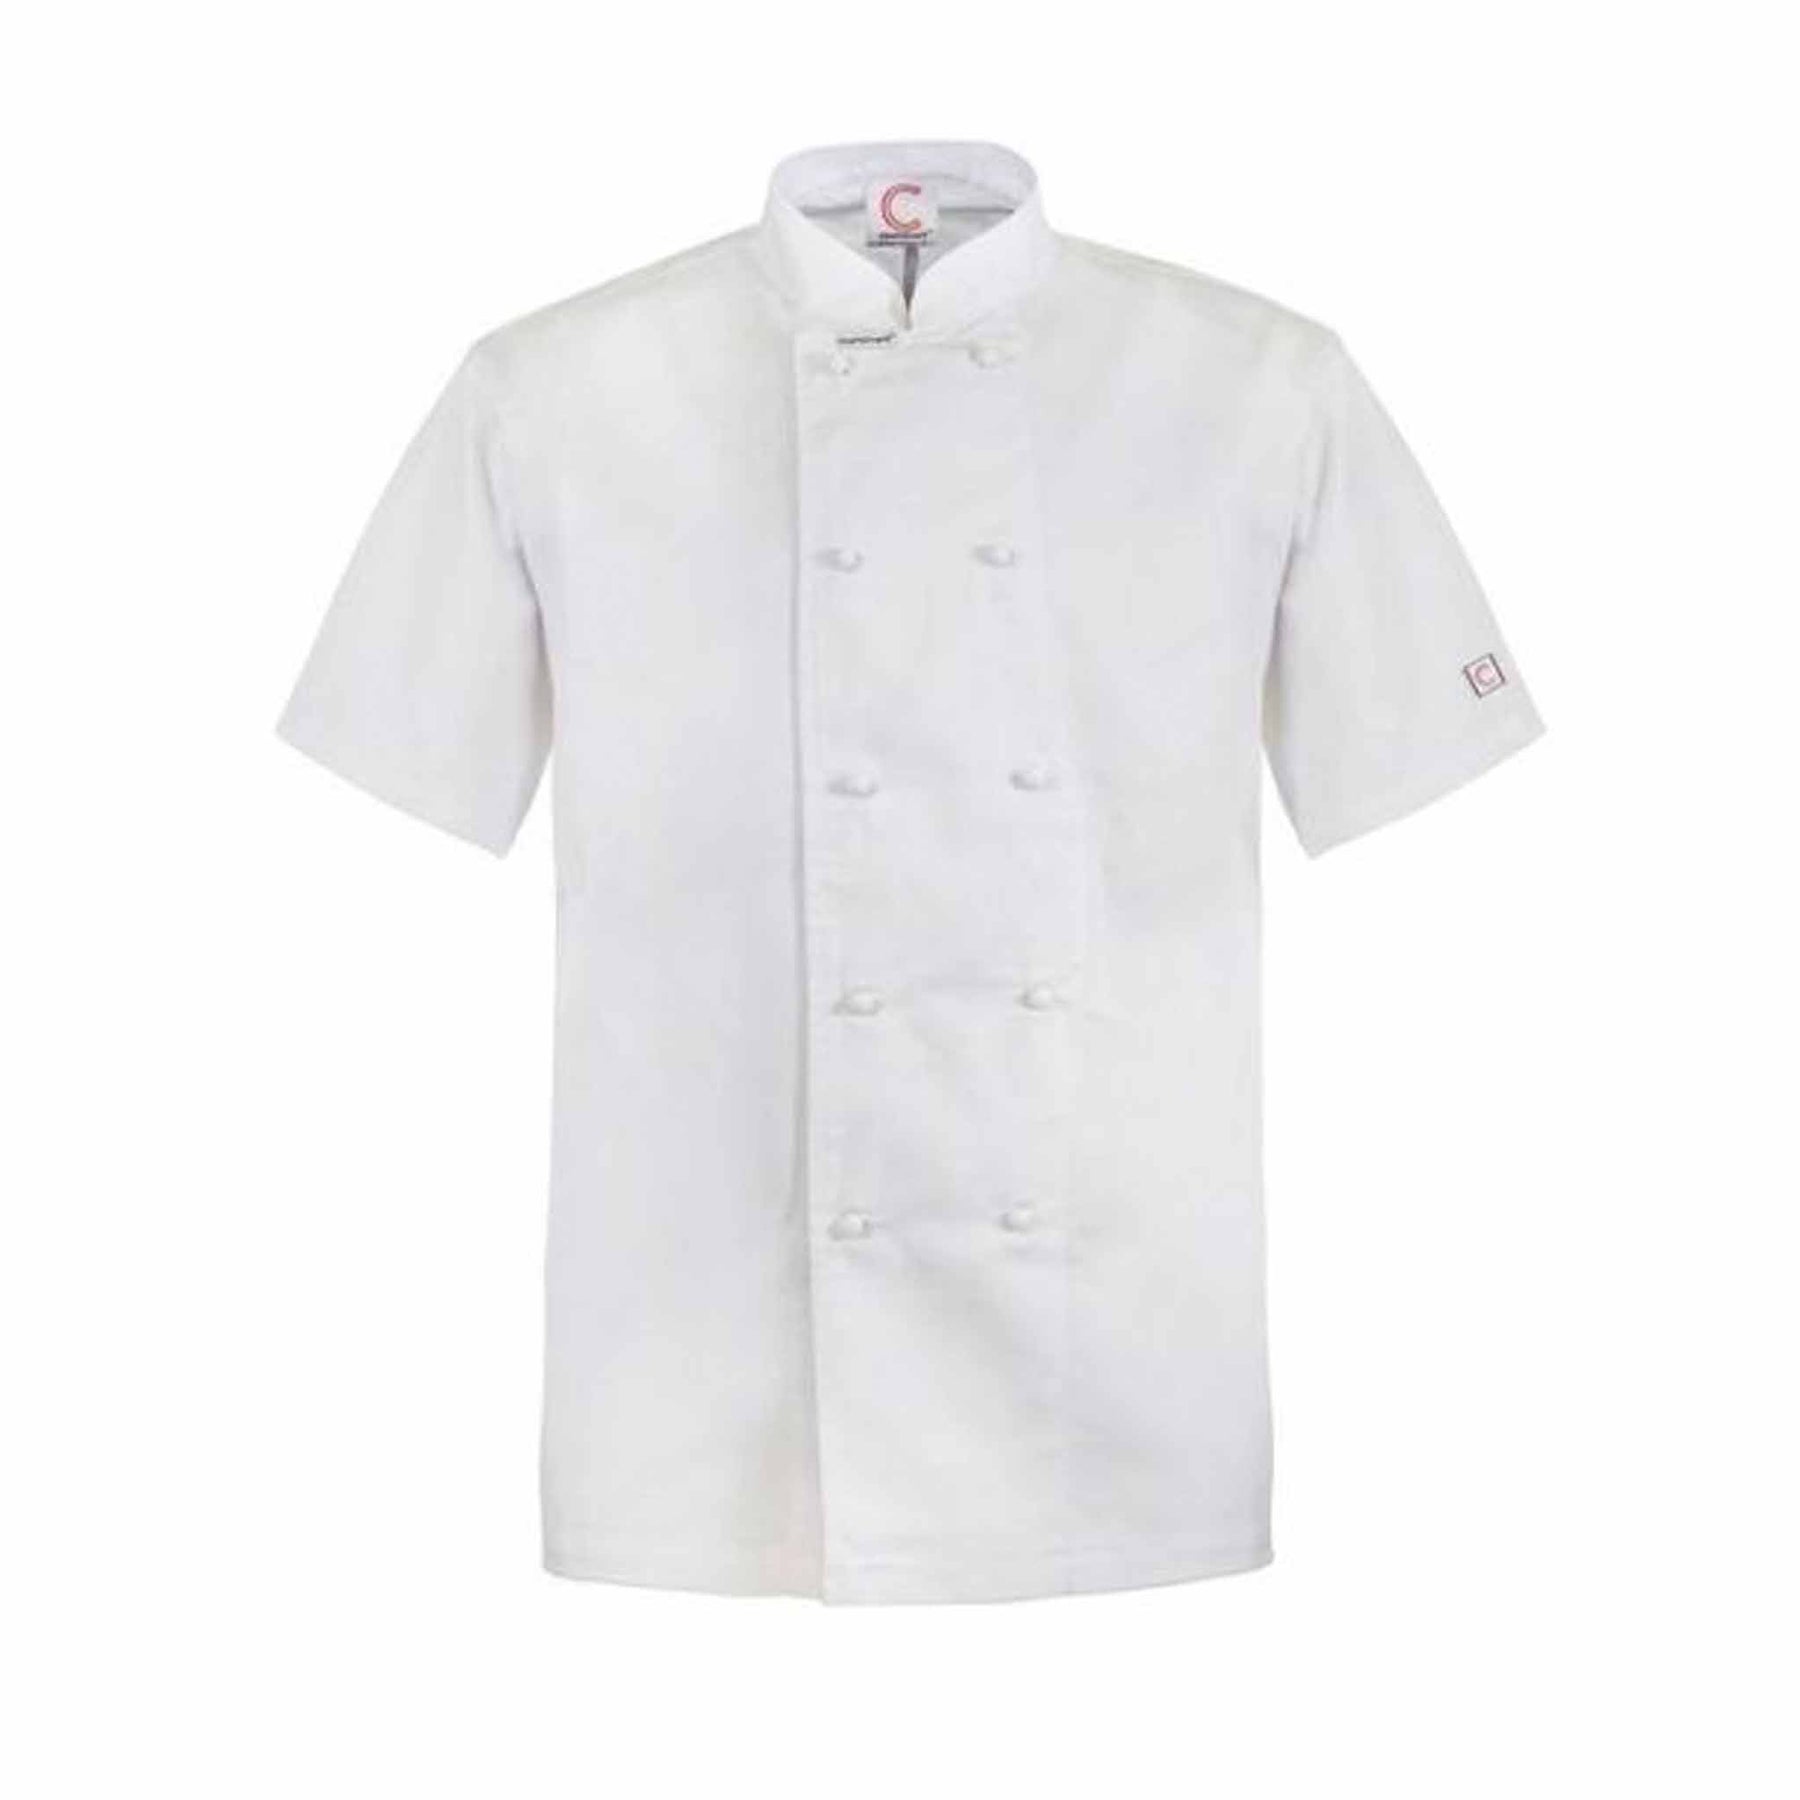 classic short sleeve chefs jacket in white